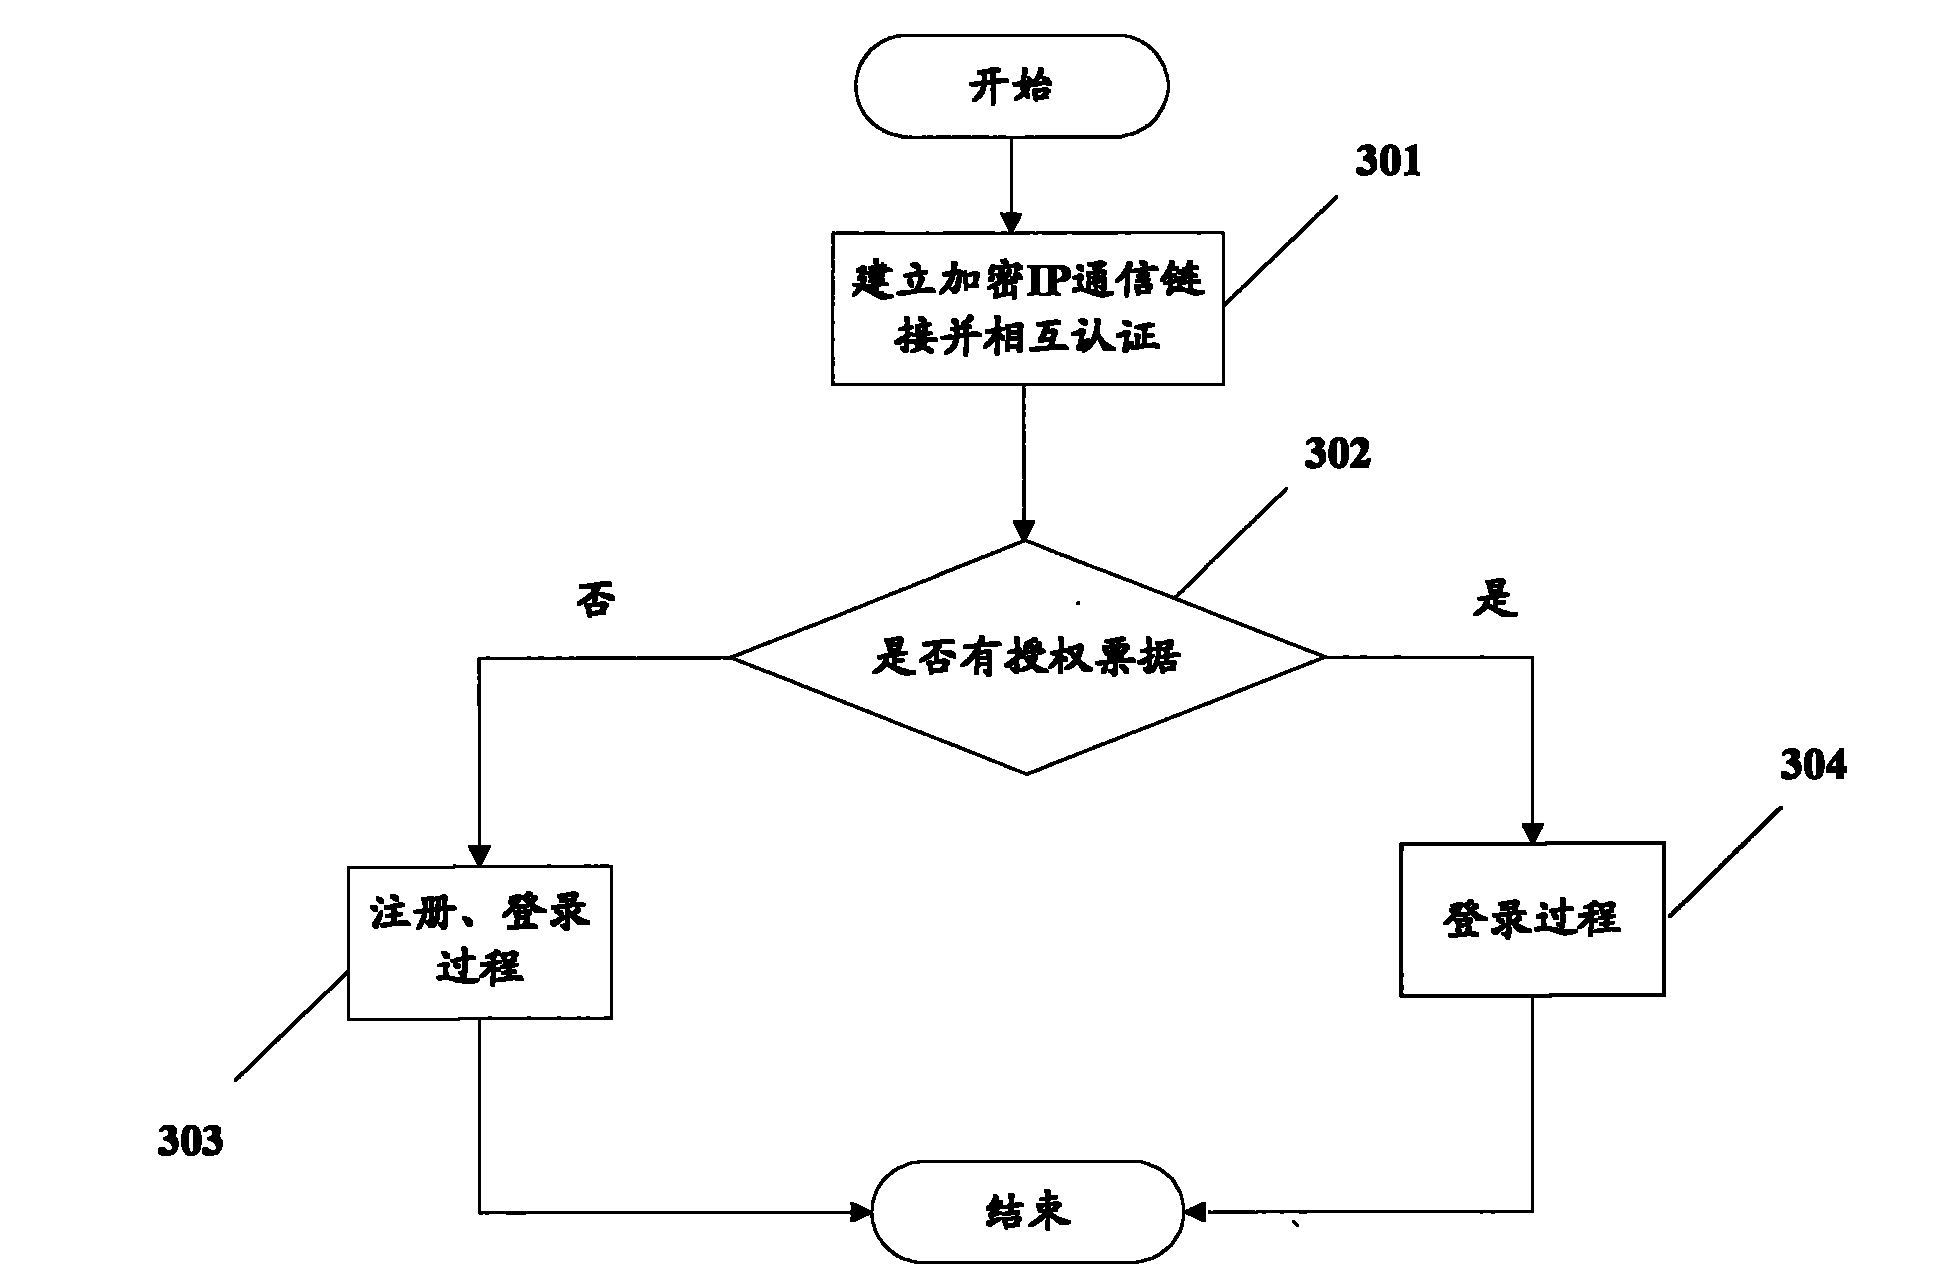 Automatic switching system and method based on cellular mobile communication network and Internet protocol (IP) network